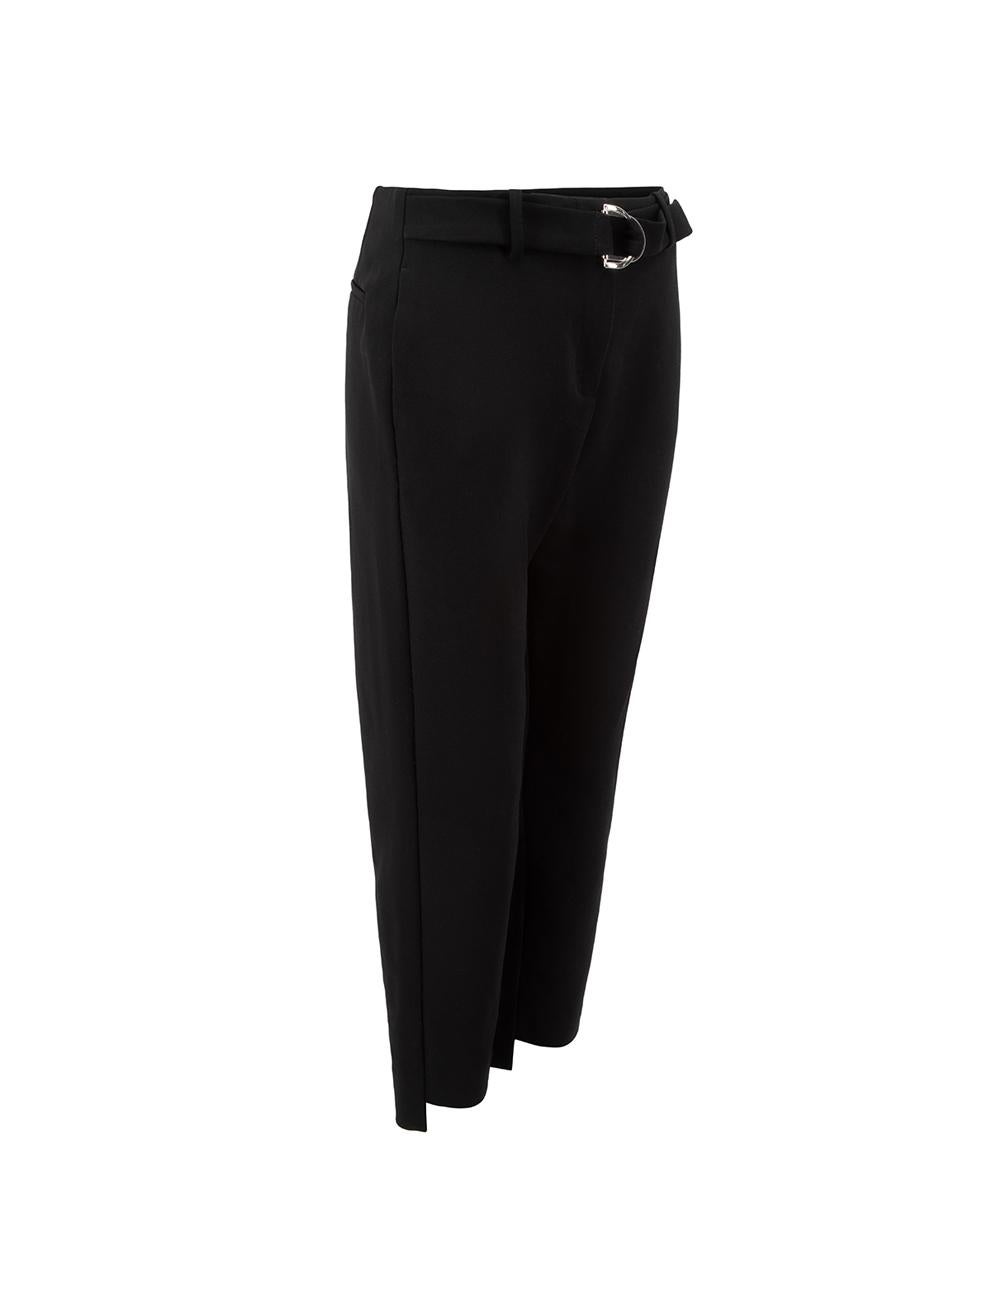 CONDITION is Very good. Hardly any visible wear to trousers is evident on this used Maje designer resale item.



Details


Black

Viscose

Straight leg trousers

Mid rise

Cropped length with step hemline

Front zip closure with clasp and